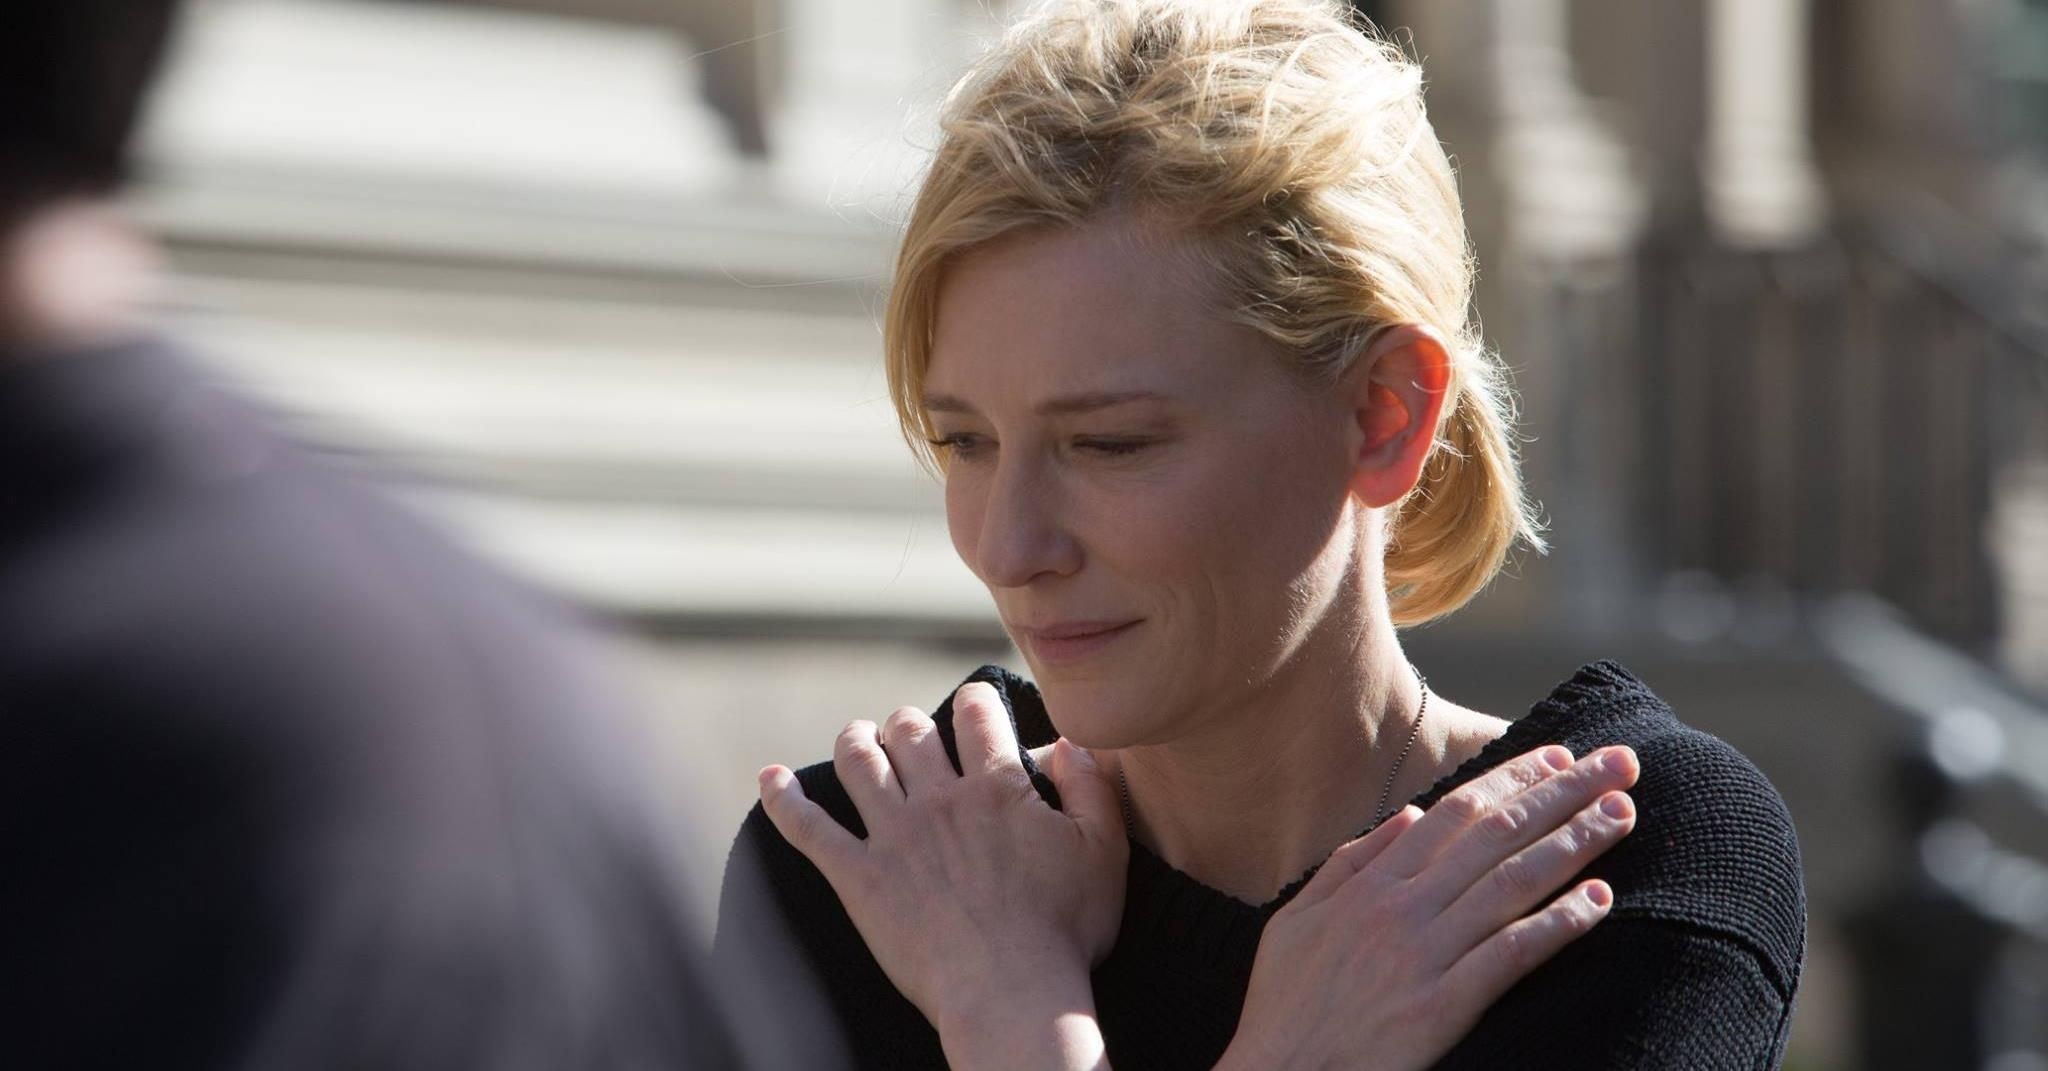 Cate Blanchett Fan: New stills and poster for Knight of Cups